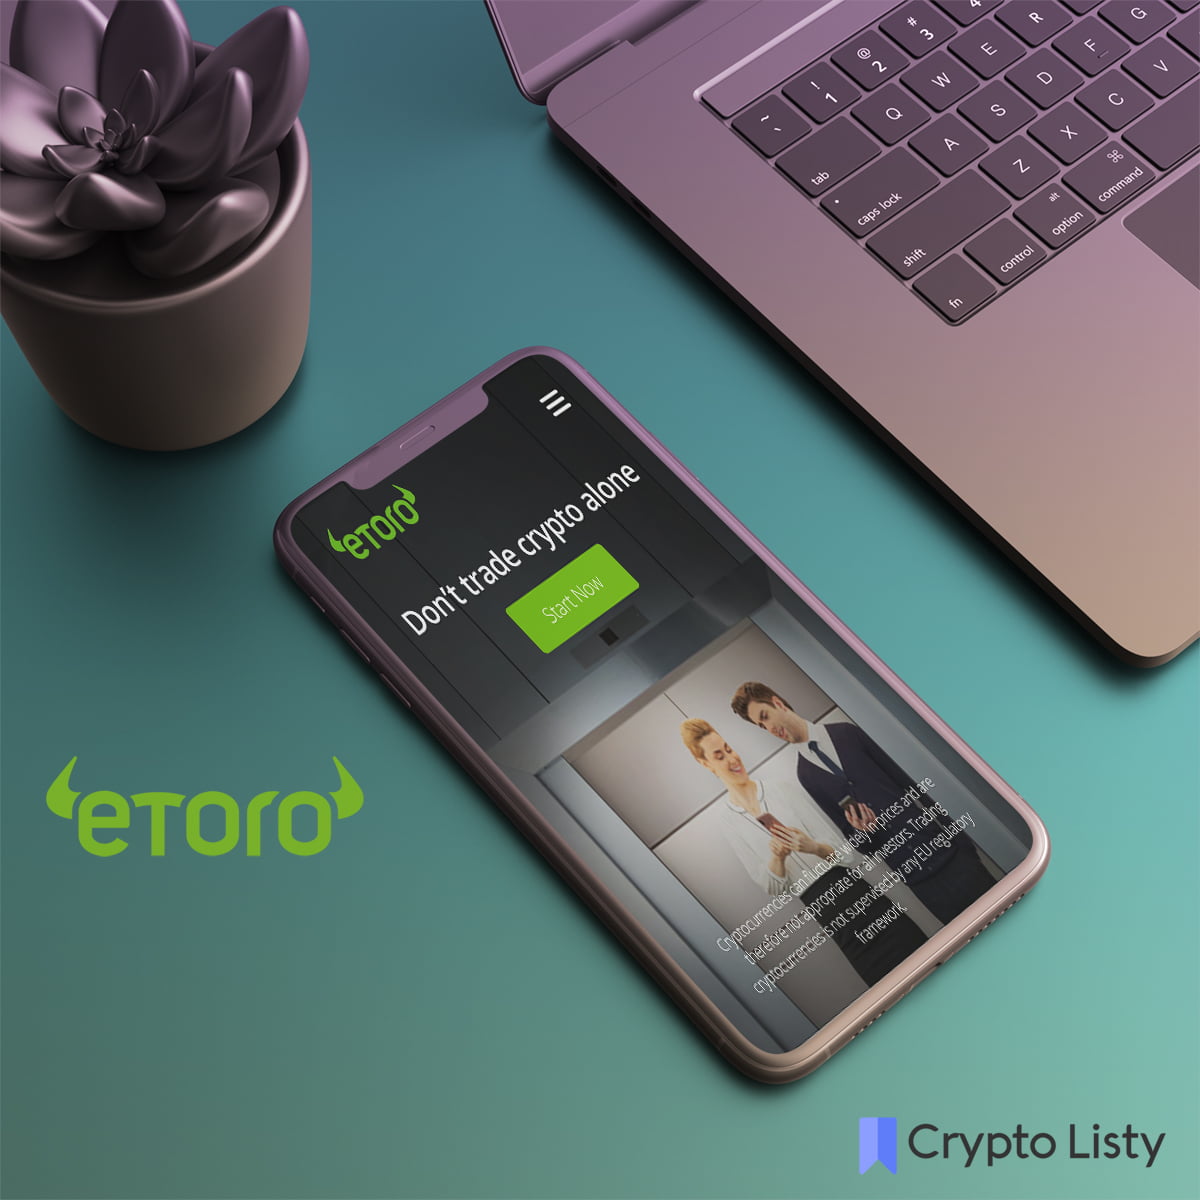 Phone next to a laptop and phone is browsing eToro website.